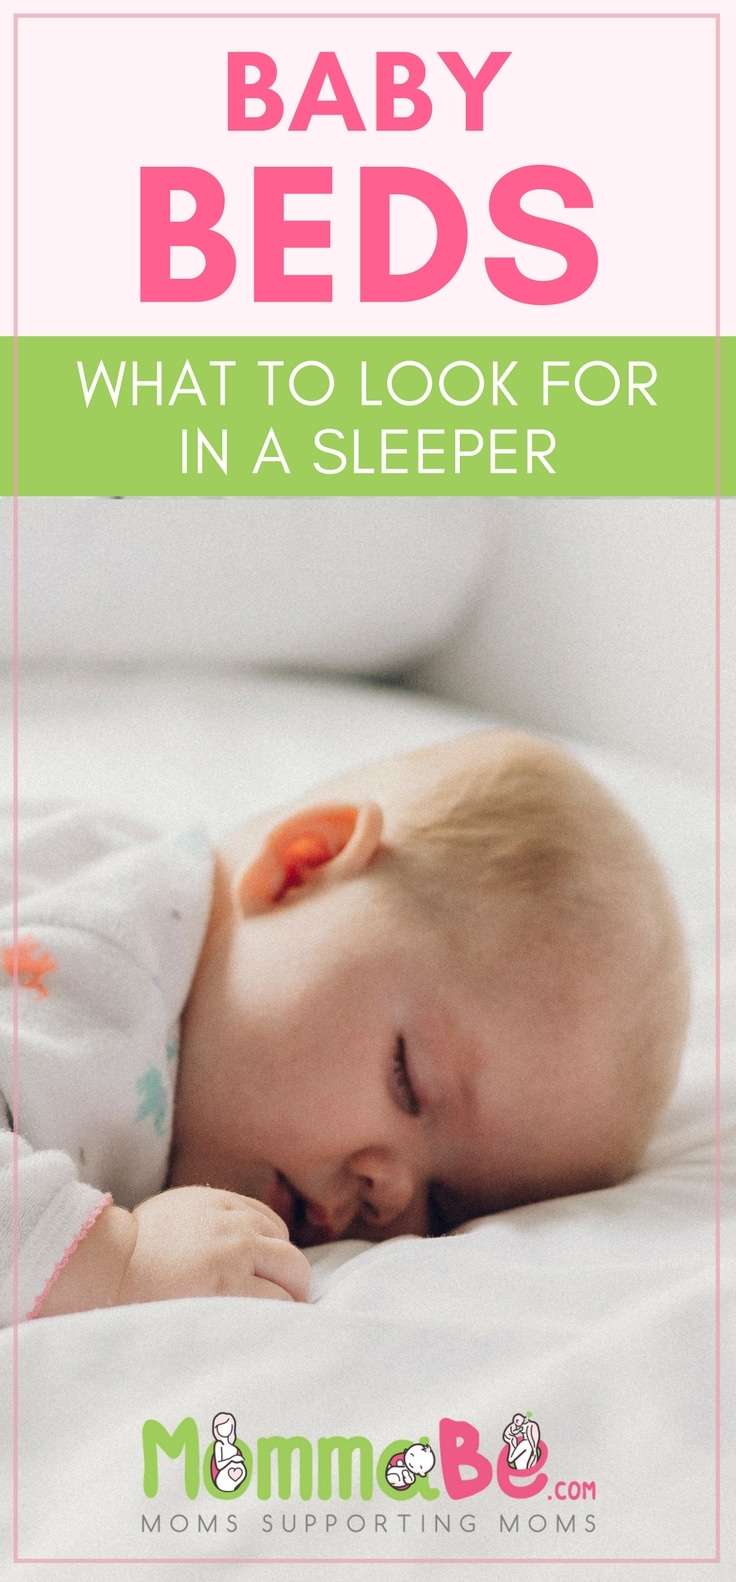 Baby Beds | What To Look For In A Sleeper